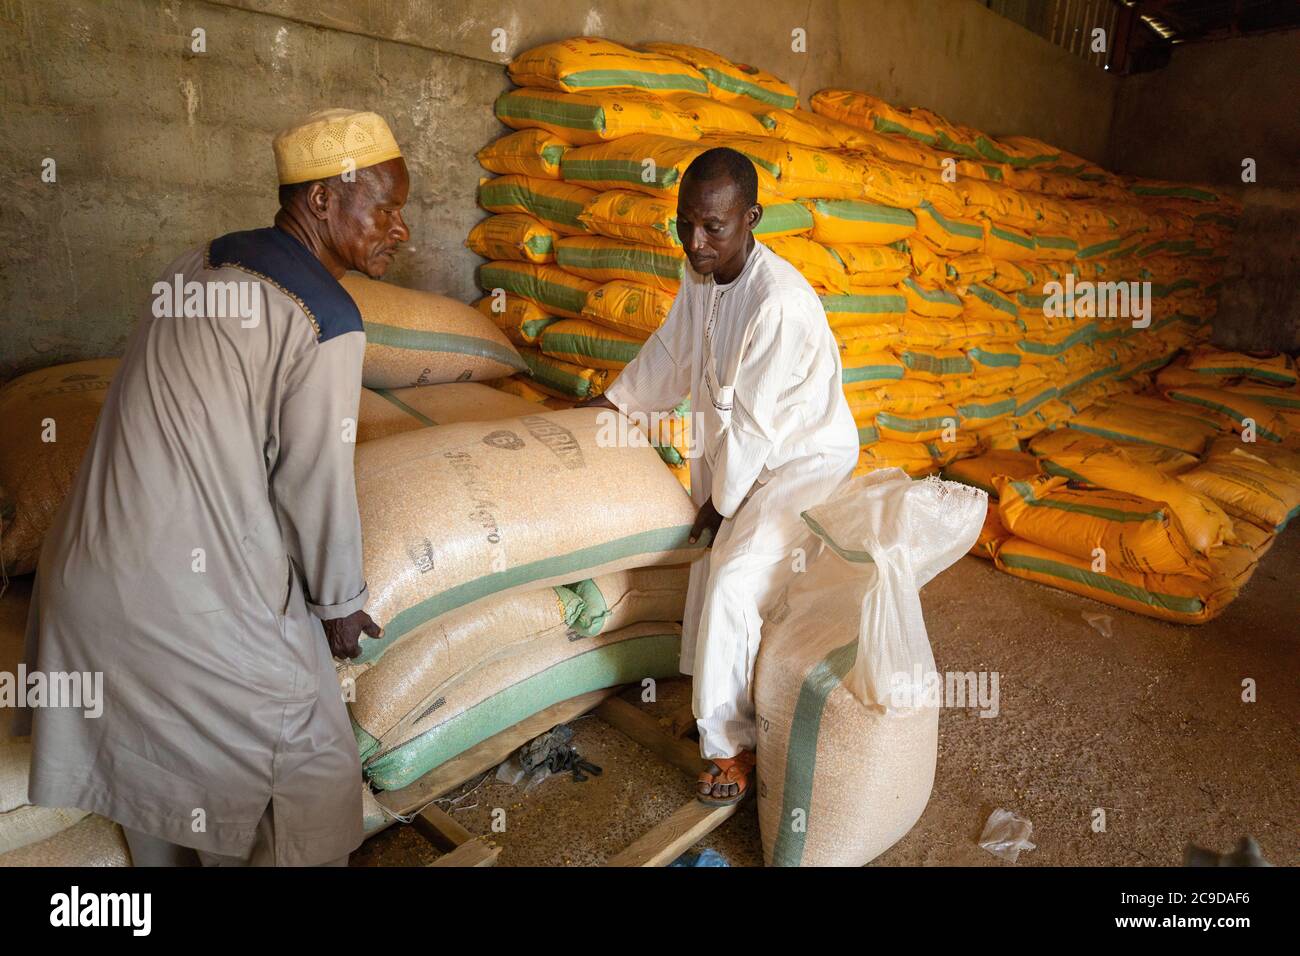 Warehouse workers Mahaman Amadou (57, L) and Muhamadou Yahaya (56, R) move sacks of maize at the headquarters of Union Adaltchi, one of Lutheran World Relief’s cooperative partners in Tahoua Region, Niger. Alliance 12/12 Project - Niger, West Africa. September 21, 2018. Photo by Jake Lyell for Lutheran World Relief. Stock Photo